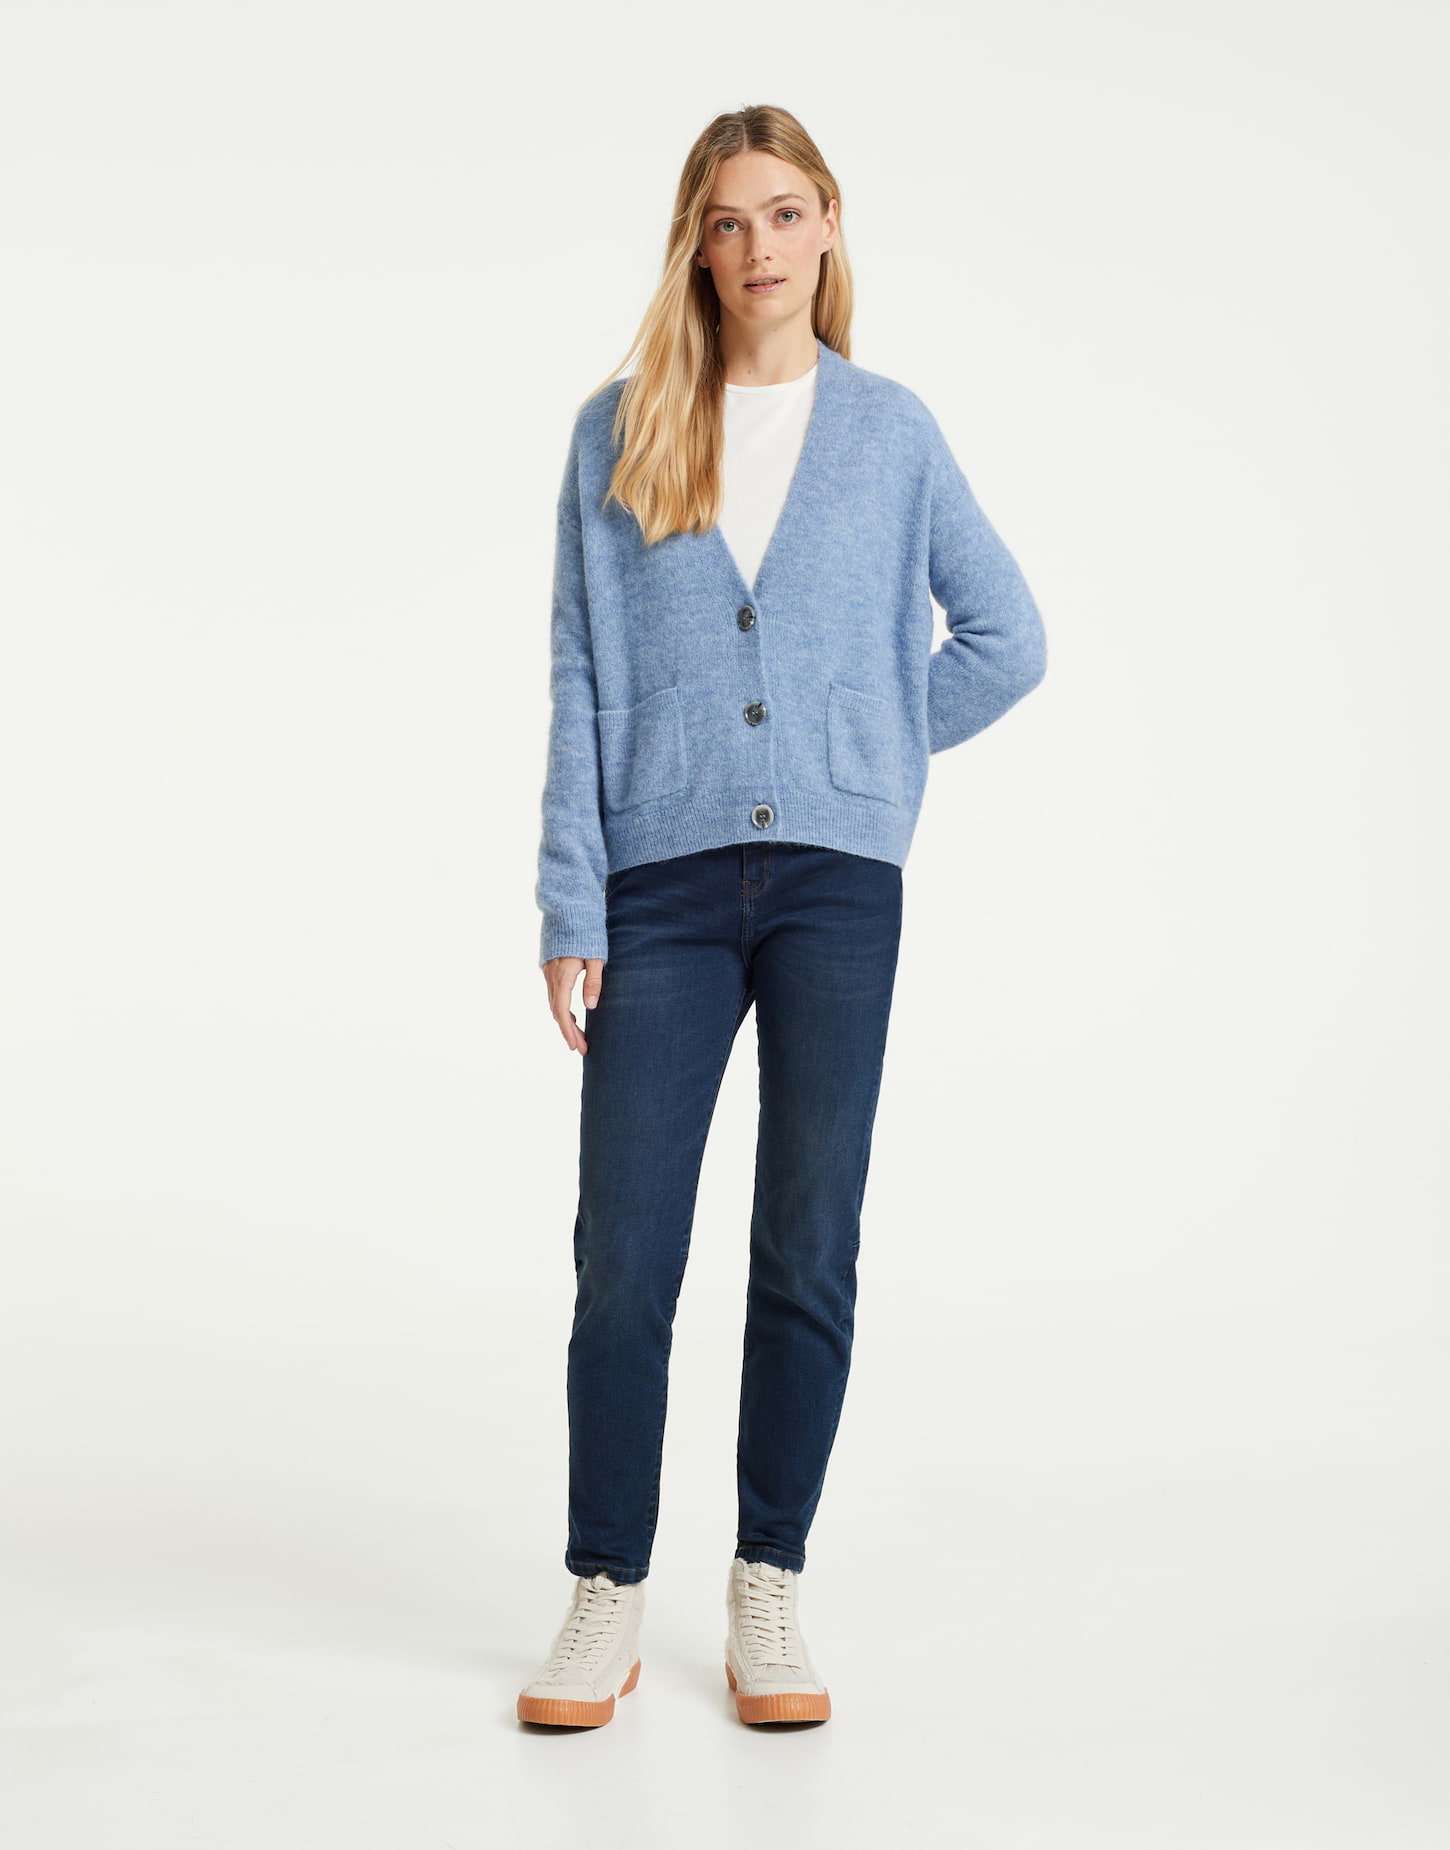 Knitted cardigan Domani soft blue by OPUS | shop your favourites online